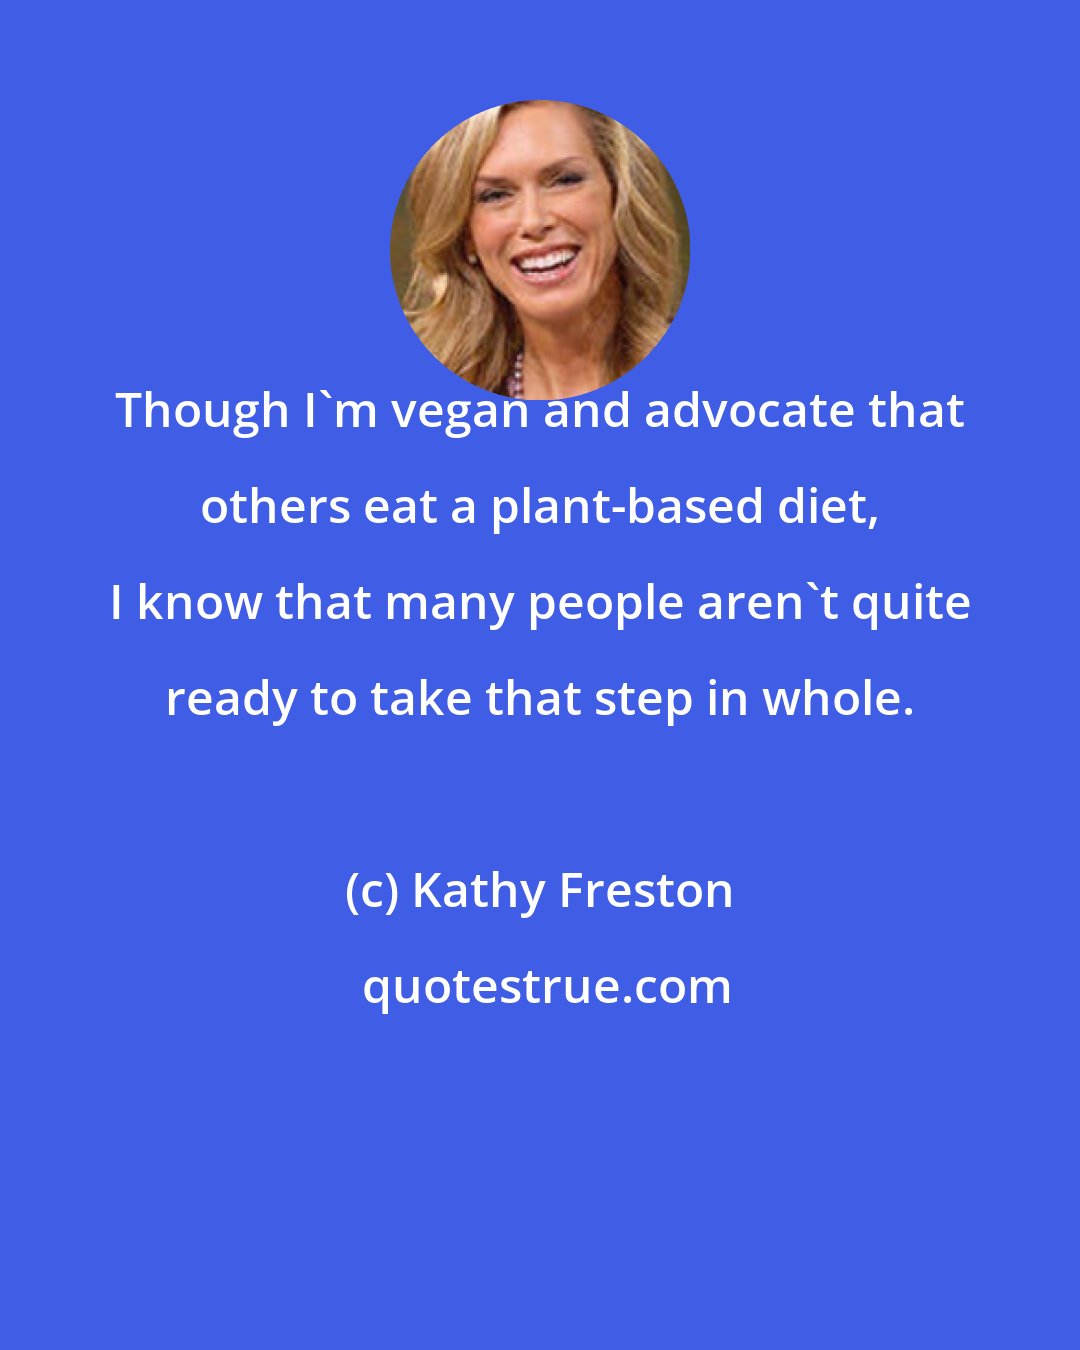 Kathy Freston: Though I'm vegan and advocate that others eat a plant-based diet, I know that many people aren't quite ready to take that step in whole.